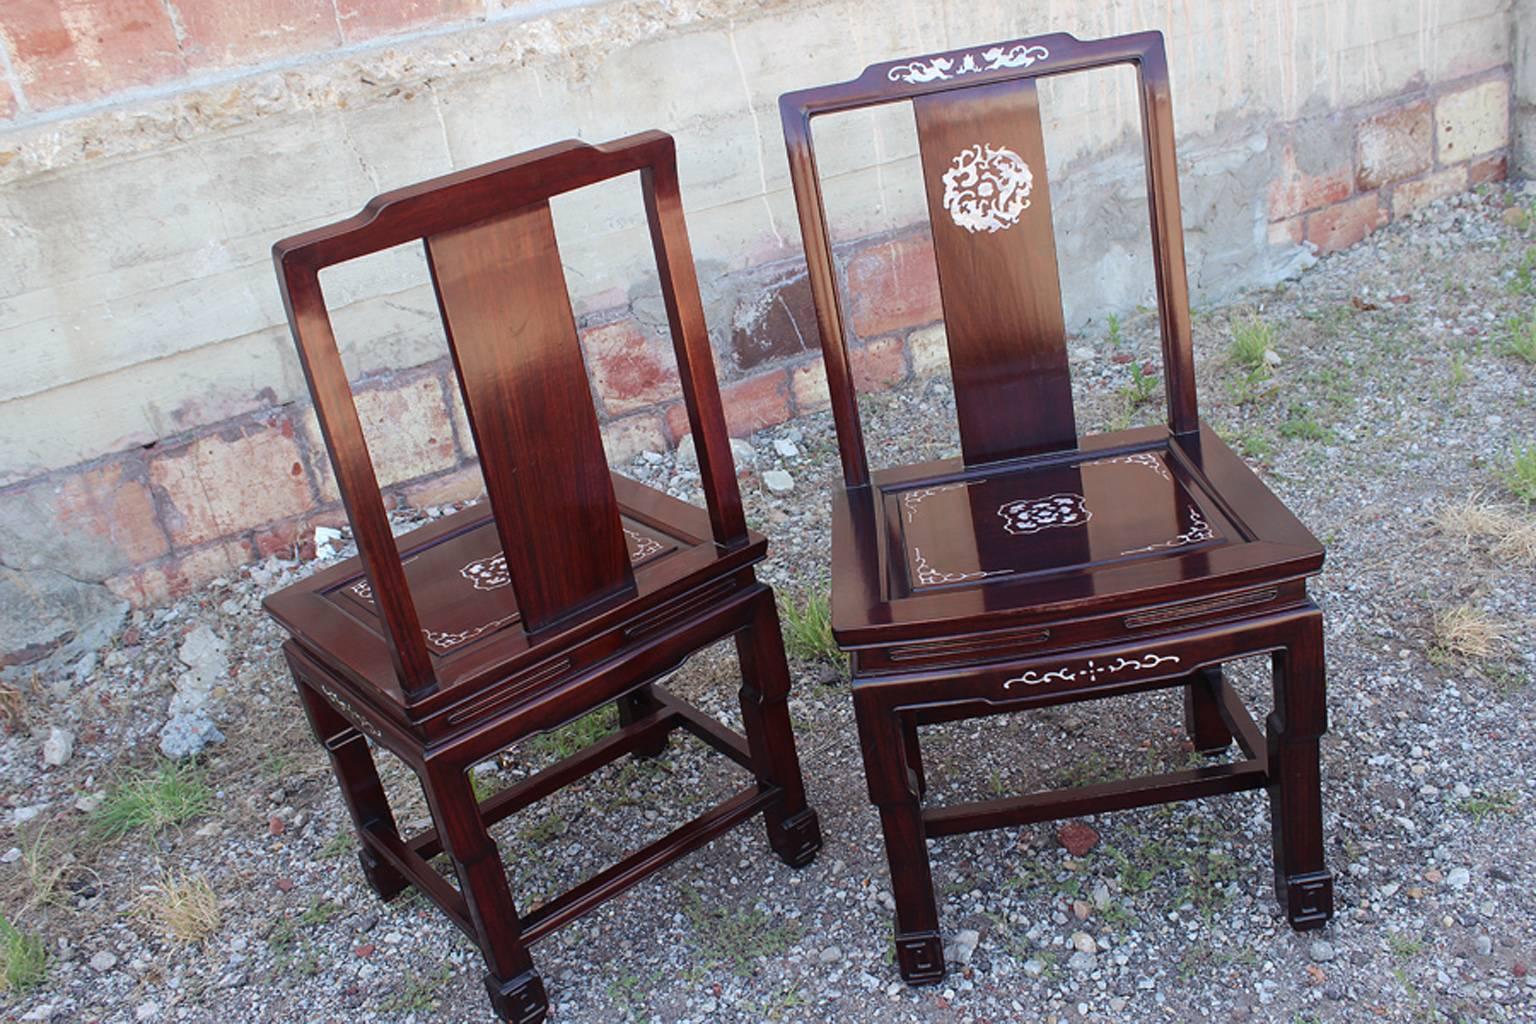 Awesome! Let's just get that out there first. This set of eight Chinese rosewood and mother-of-pearl vintage dining chairs are simply awesome! I don't know what else to say. I hope the photos speak for themselves. Each chair is inlaid with intricate